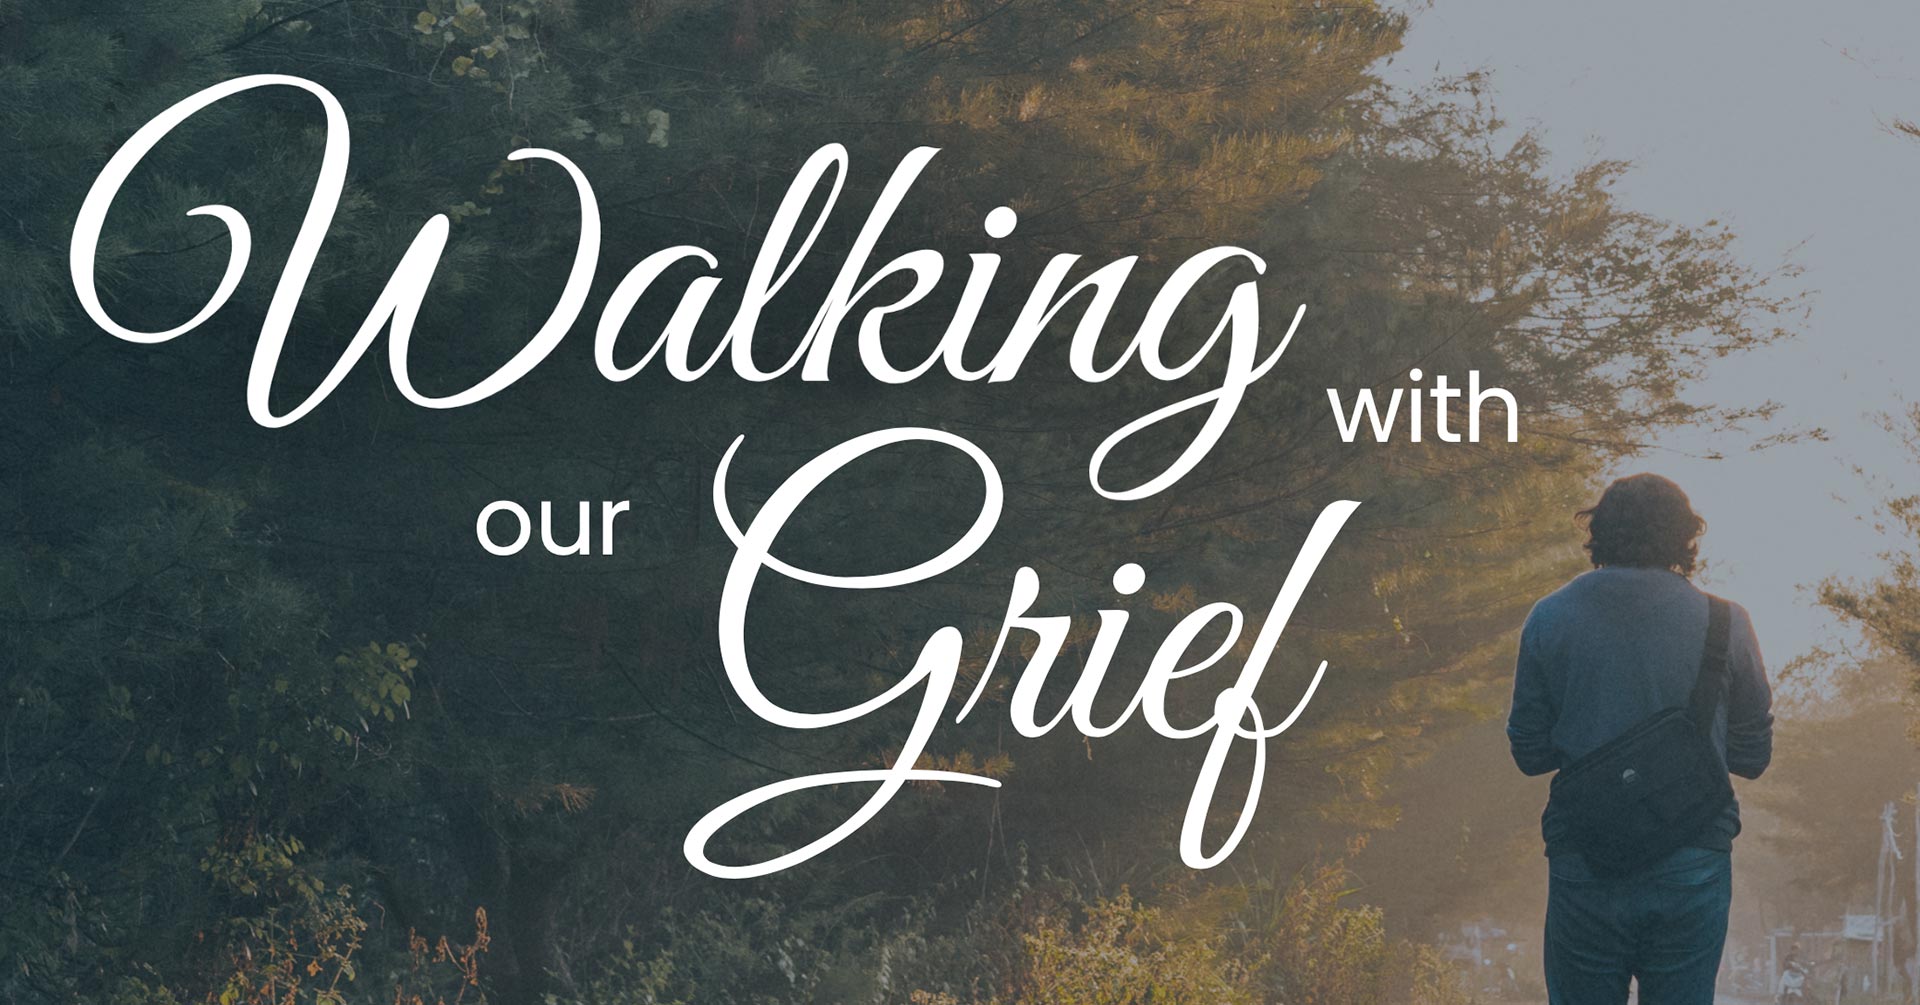 An image of a person waliking on a path with the text "Walking With Our Grief" superimposed over the photo.